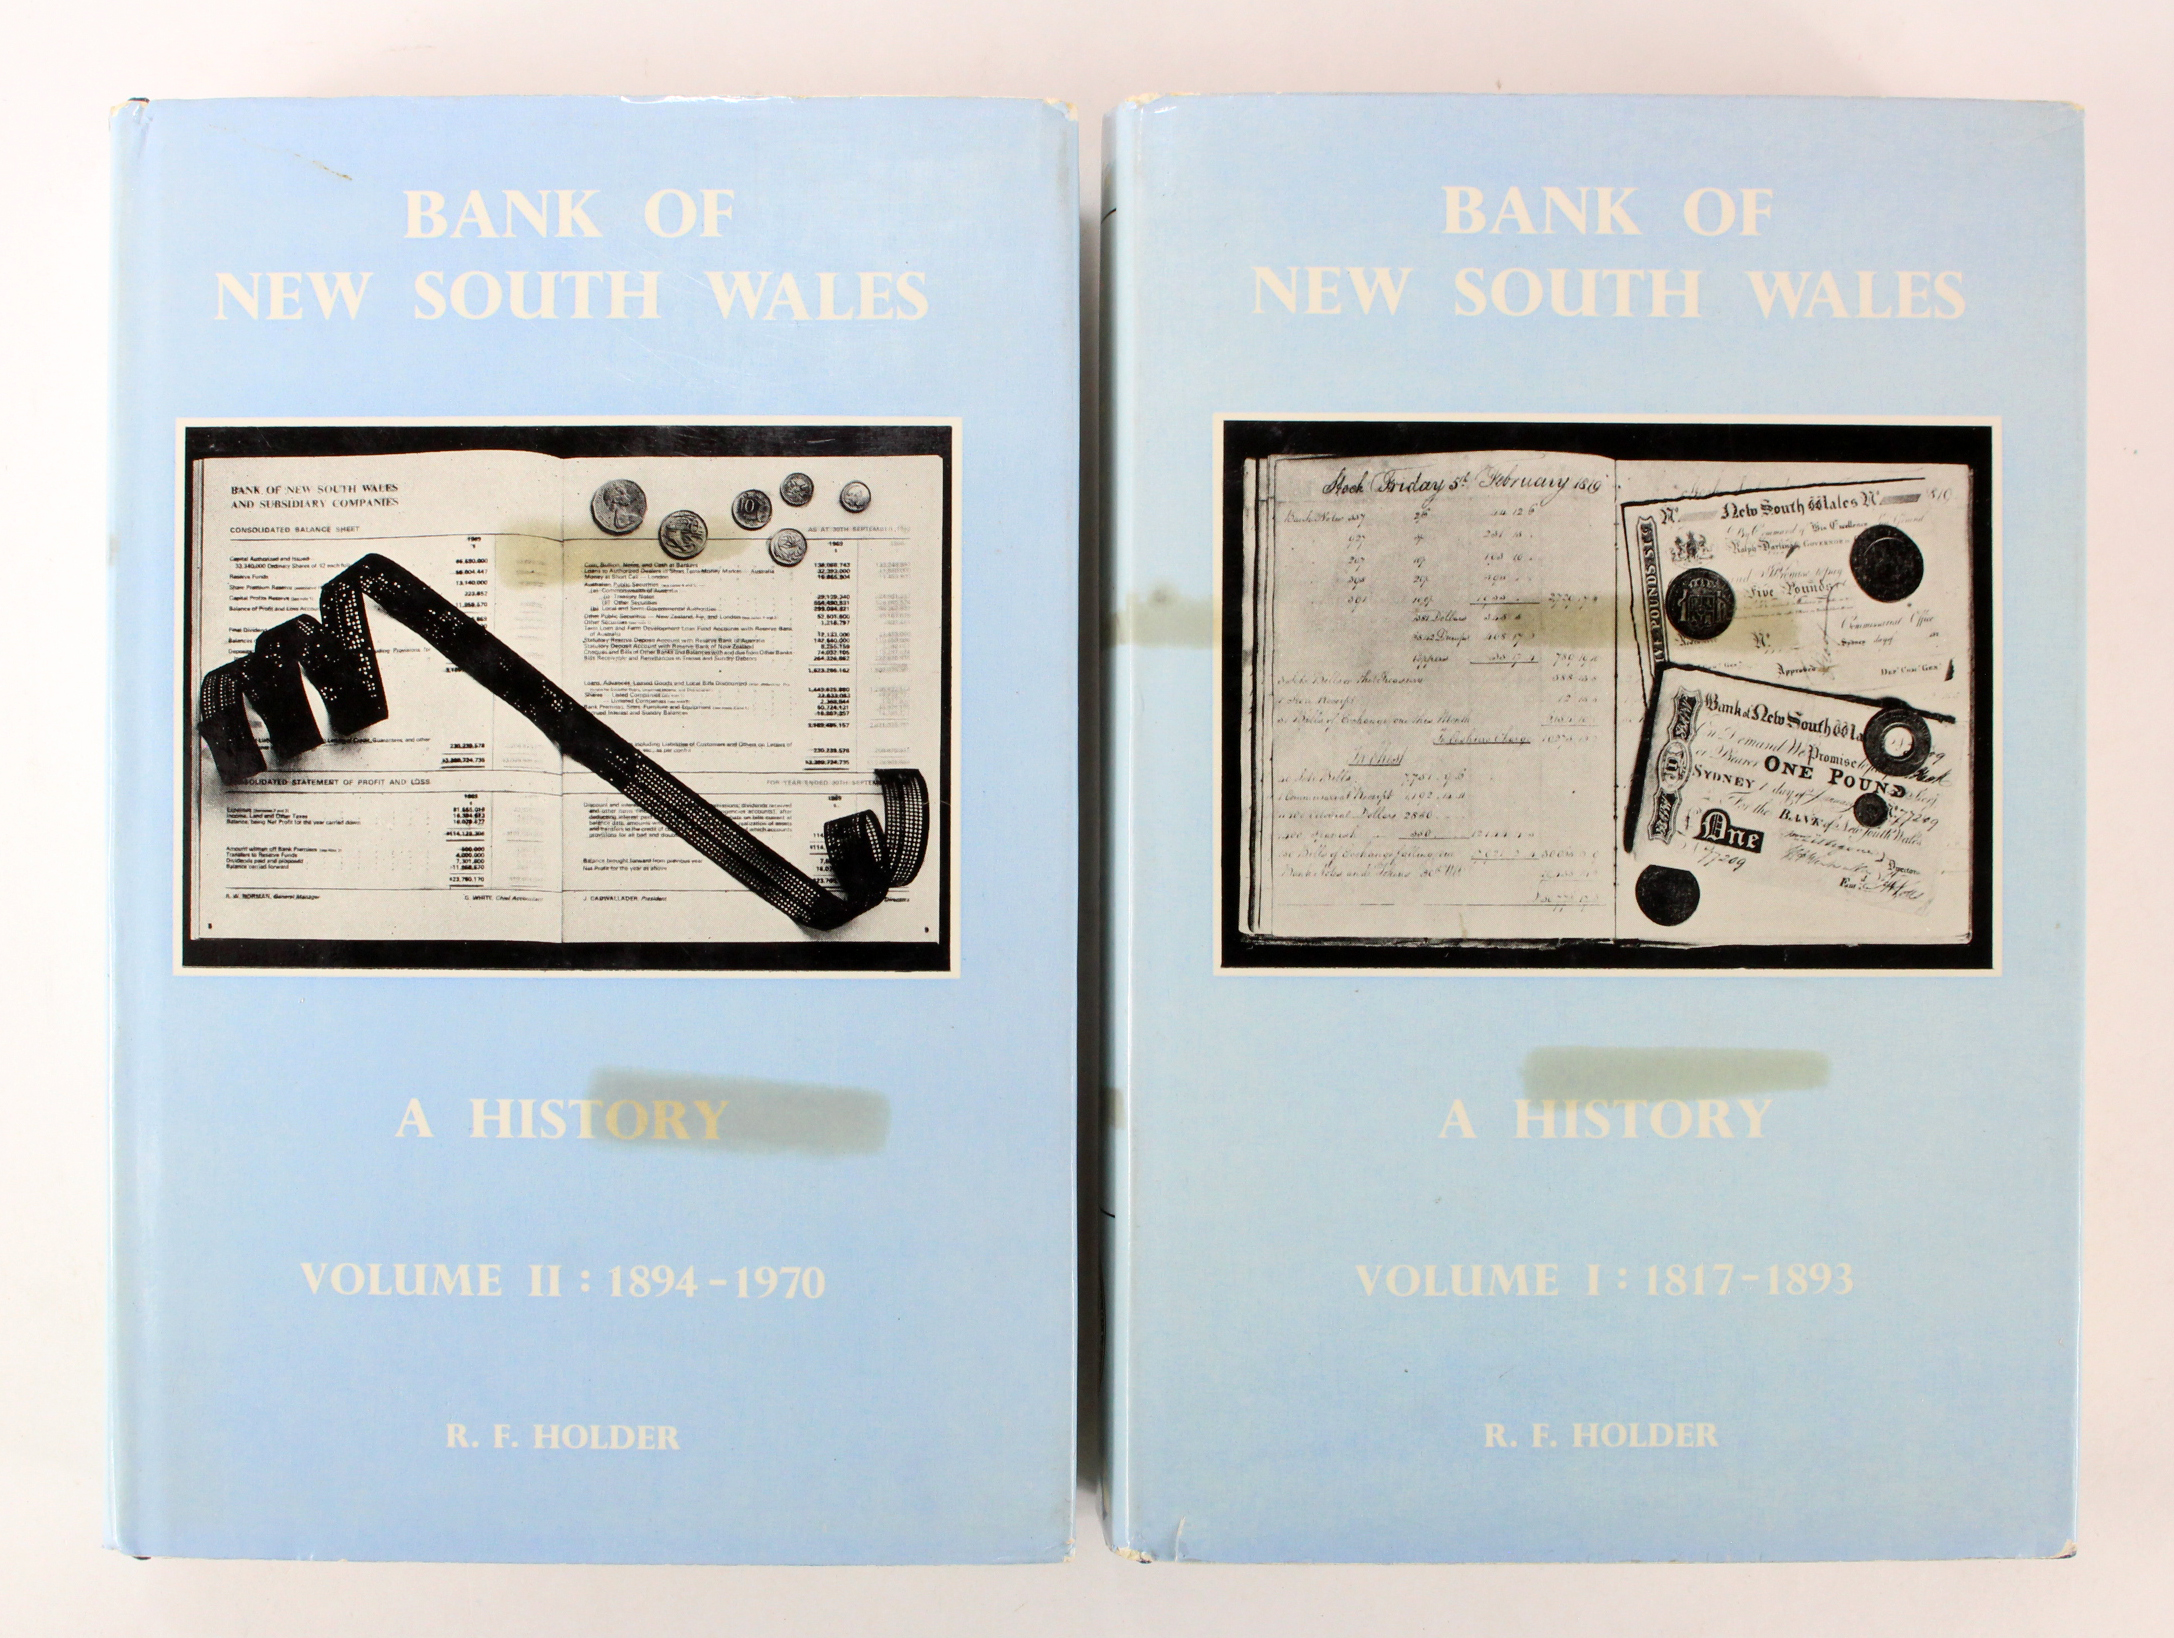 Books (2), Bank of New South Wales a History Volume I 1817 - 1893 and Volume II 1894 - 1970 by R.